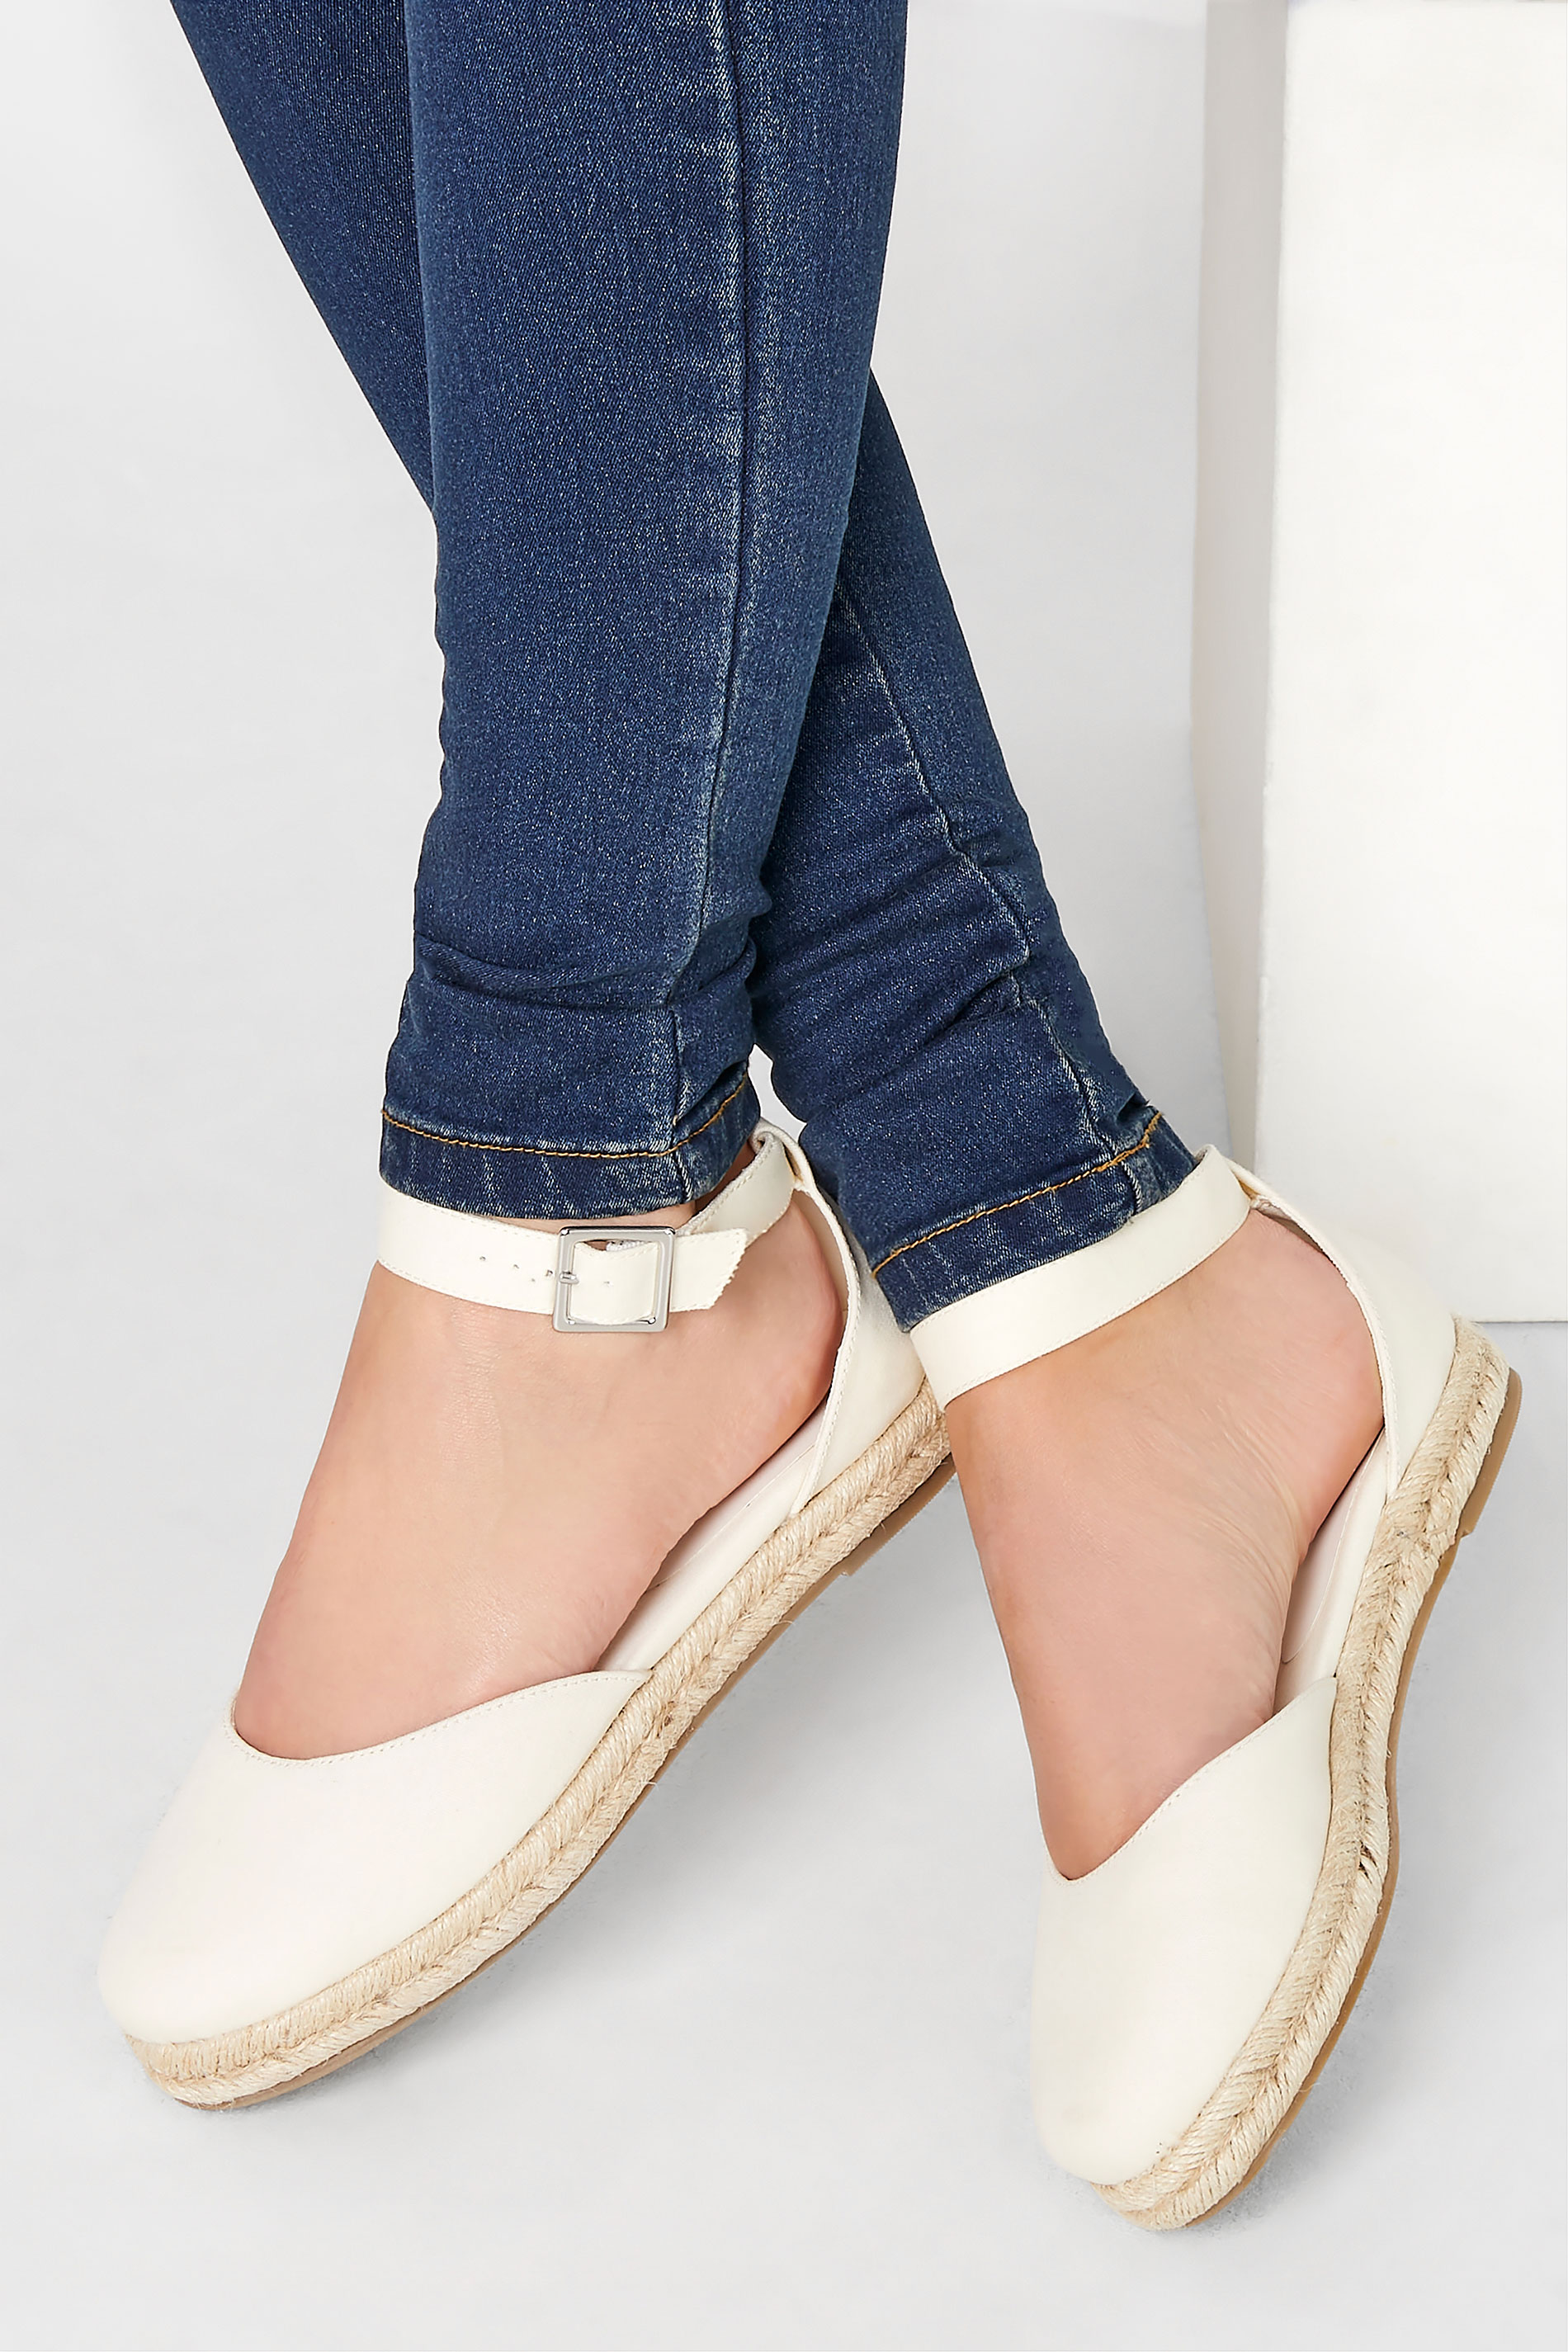 LTS White Closed Toe Espadrilles In Standard D Fit | Long Tall Sally  1